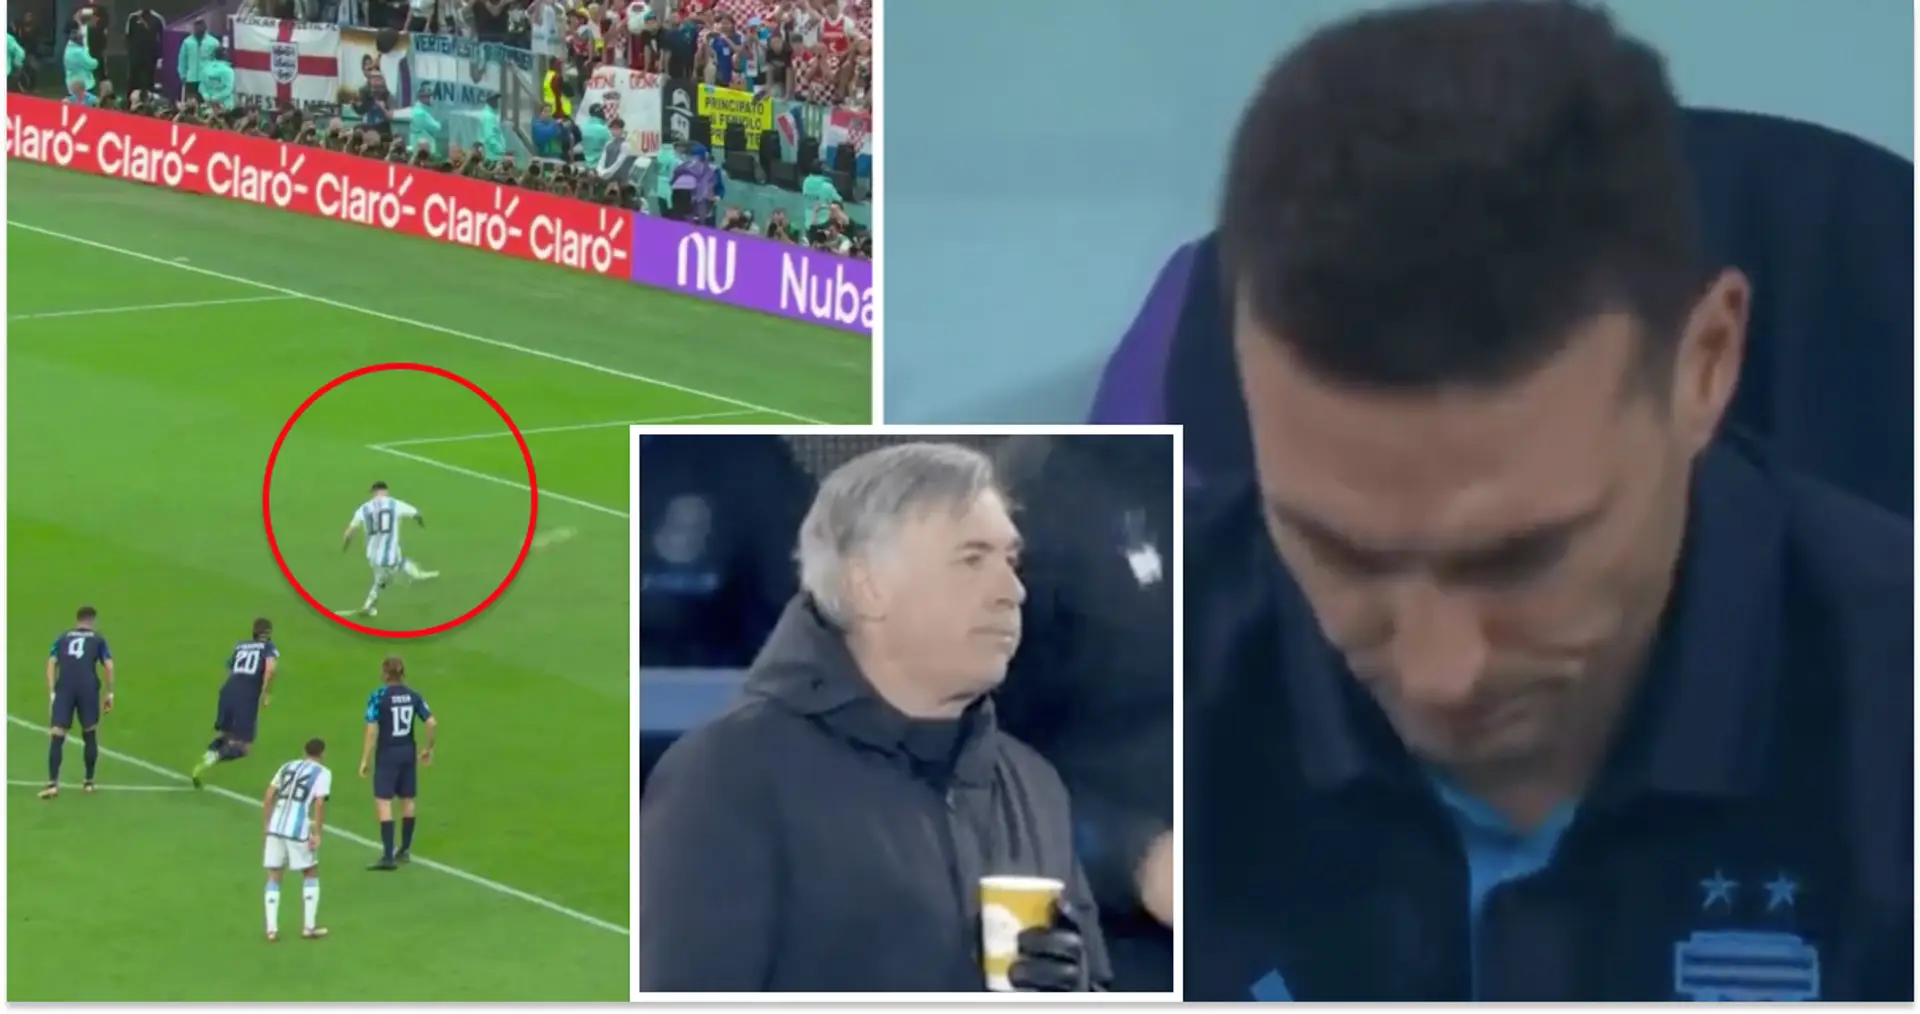 'Turning into Ancelotti': Scaloni's weird reaction to Messi's goal caught on camera